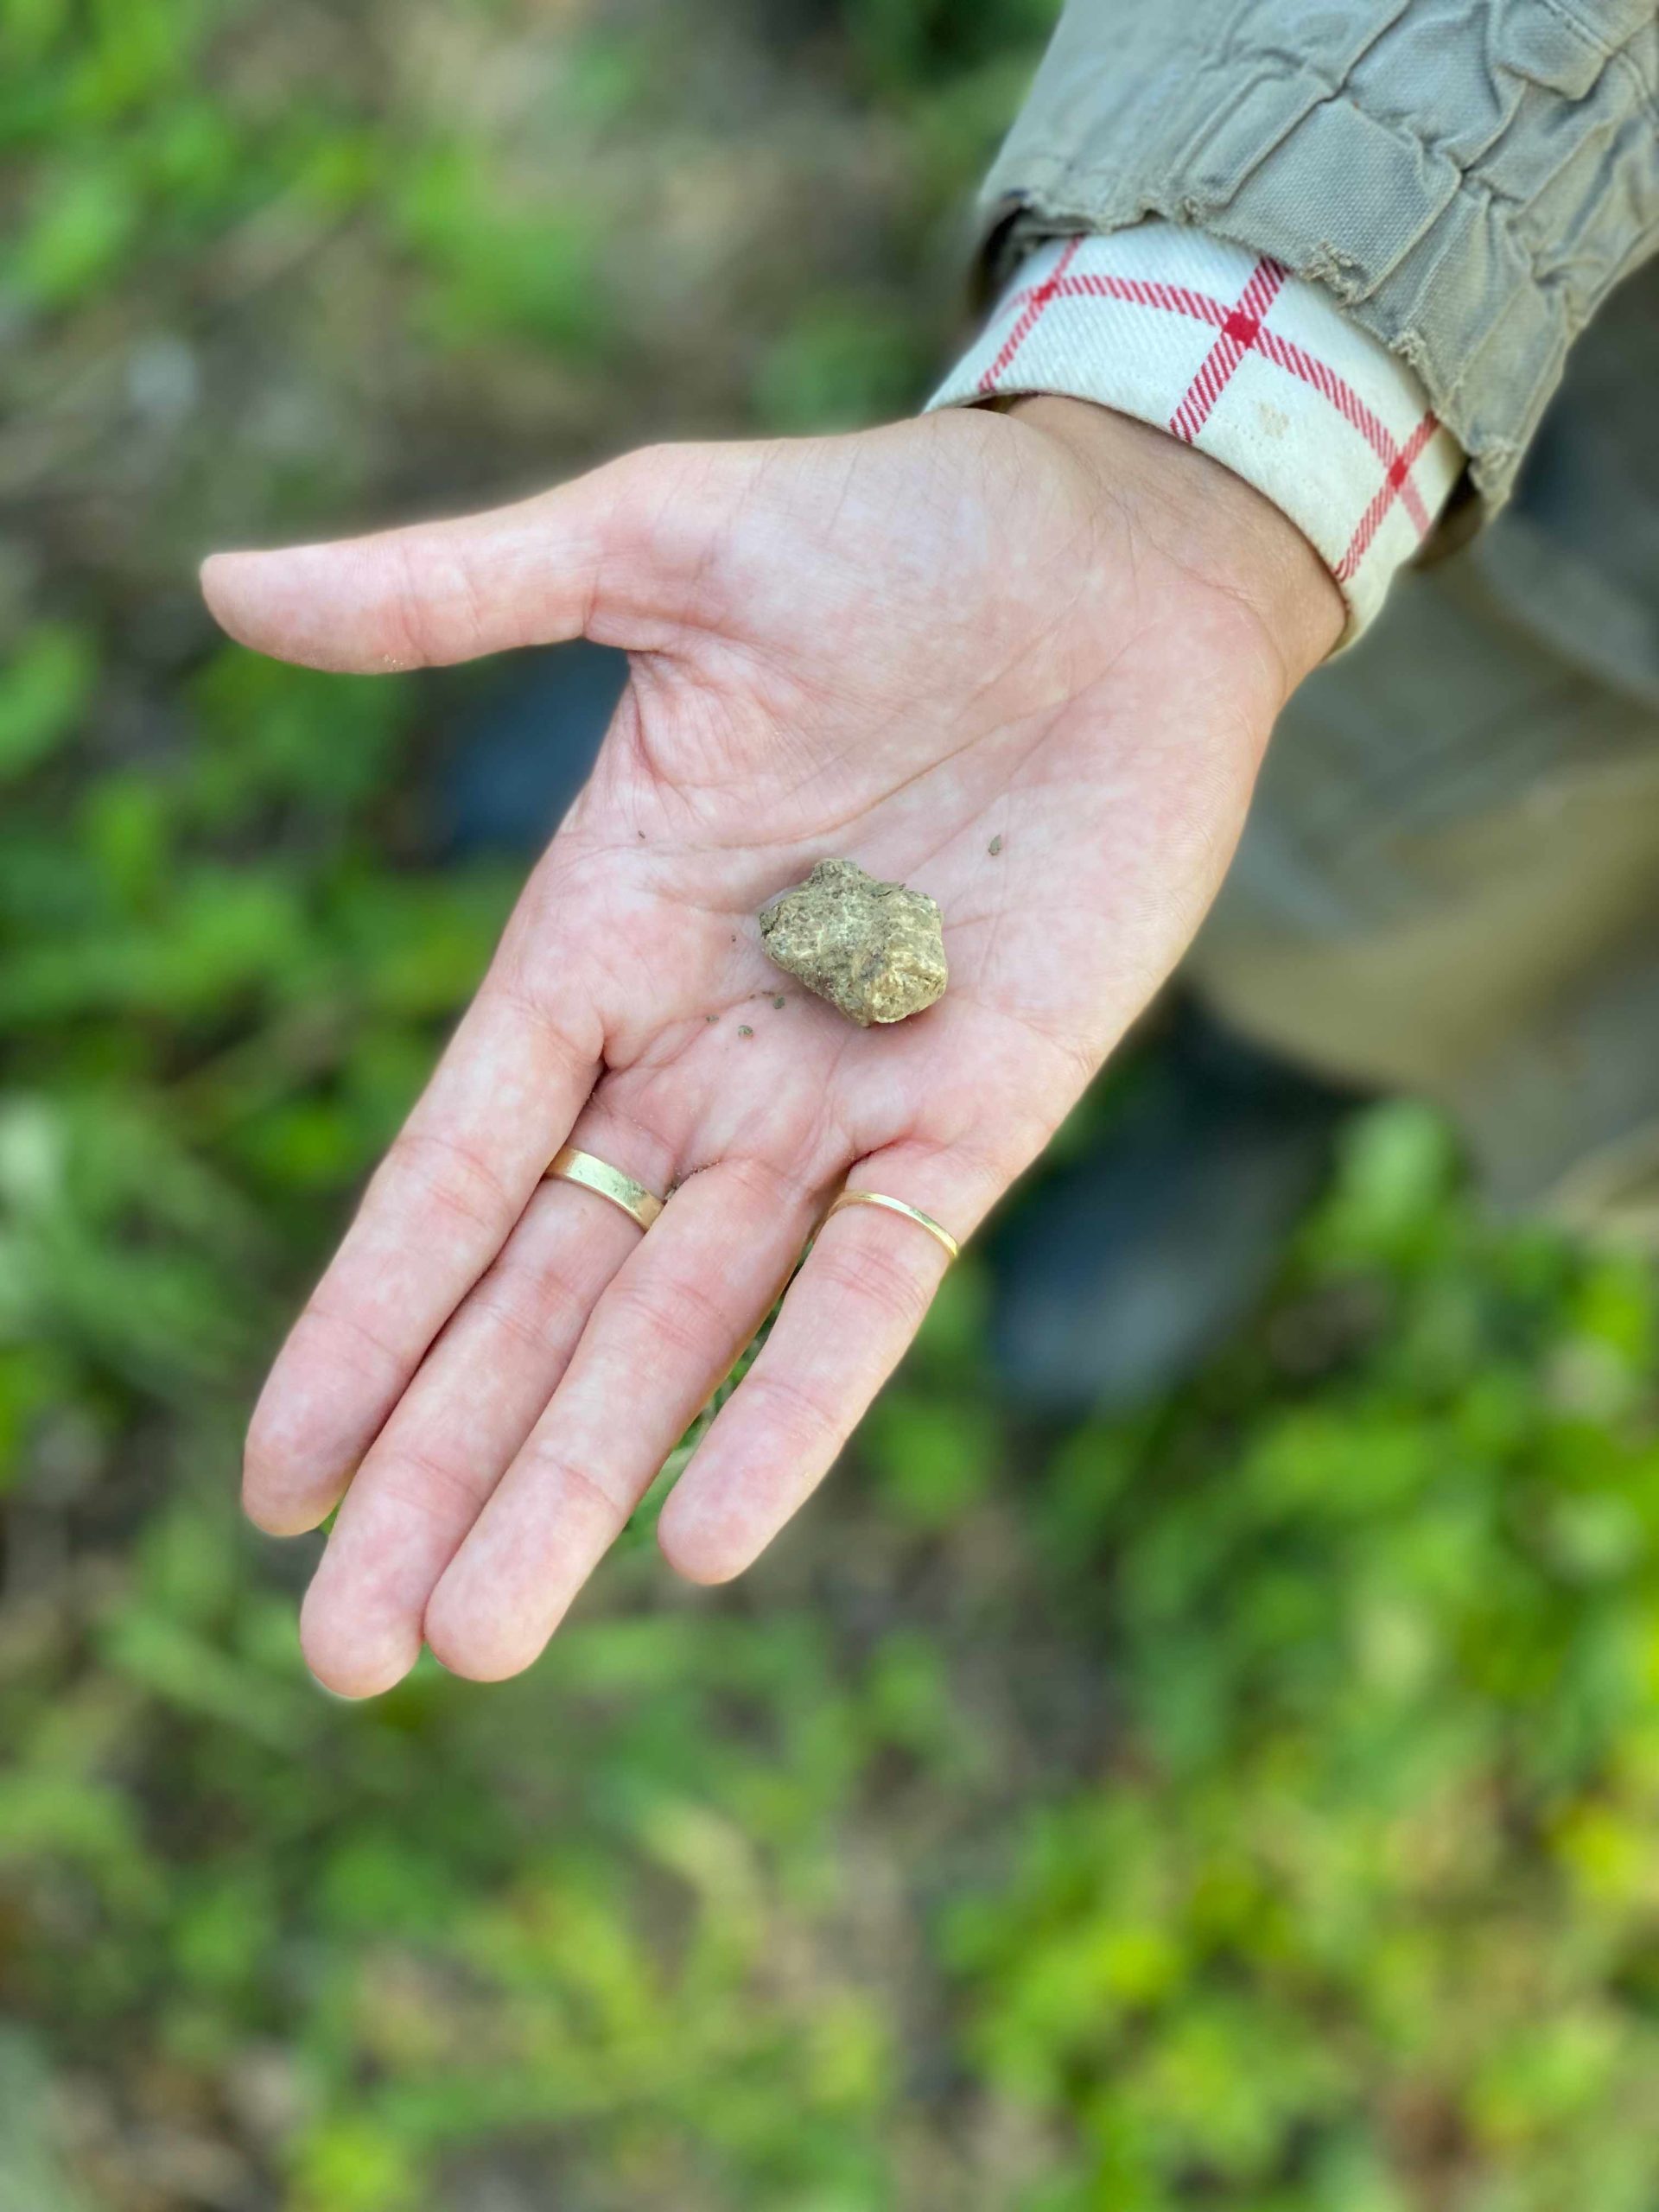 One of the minuscule truffle nuggets we found